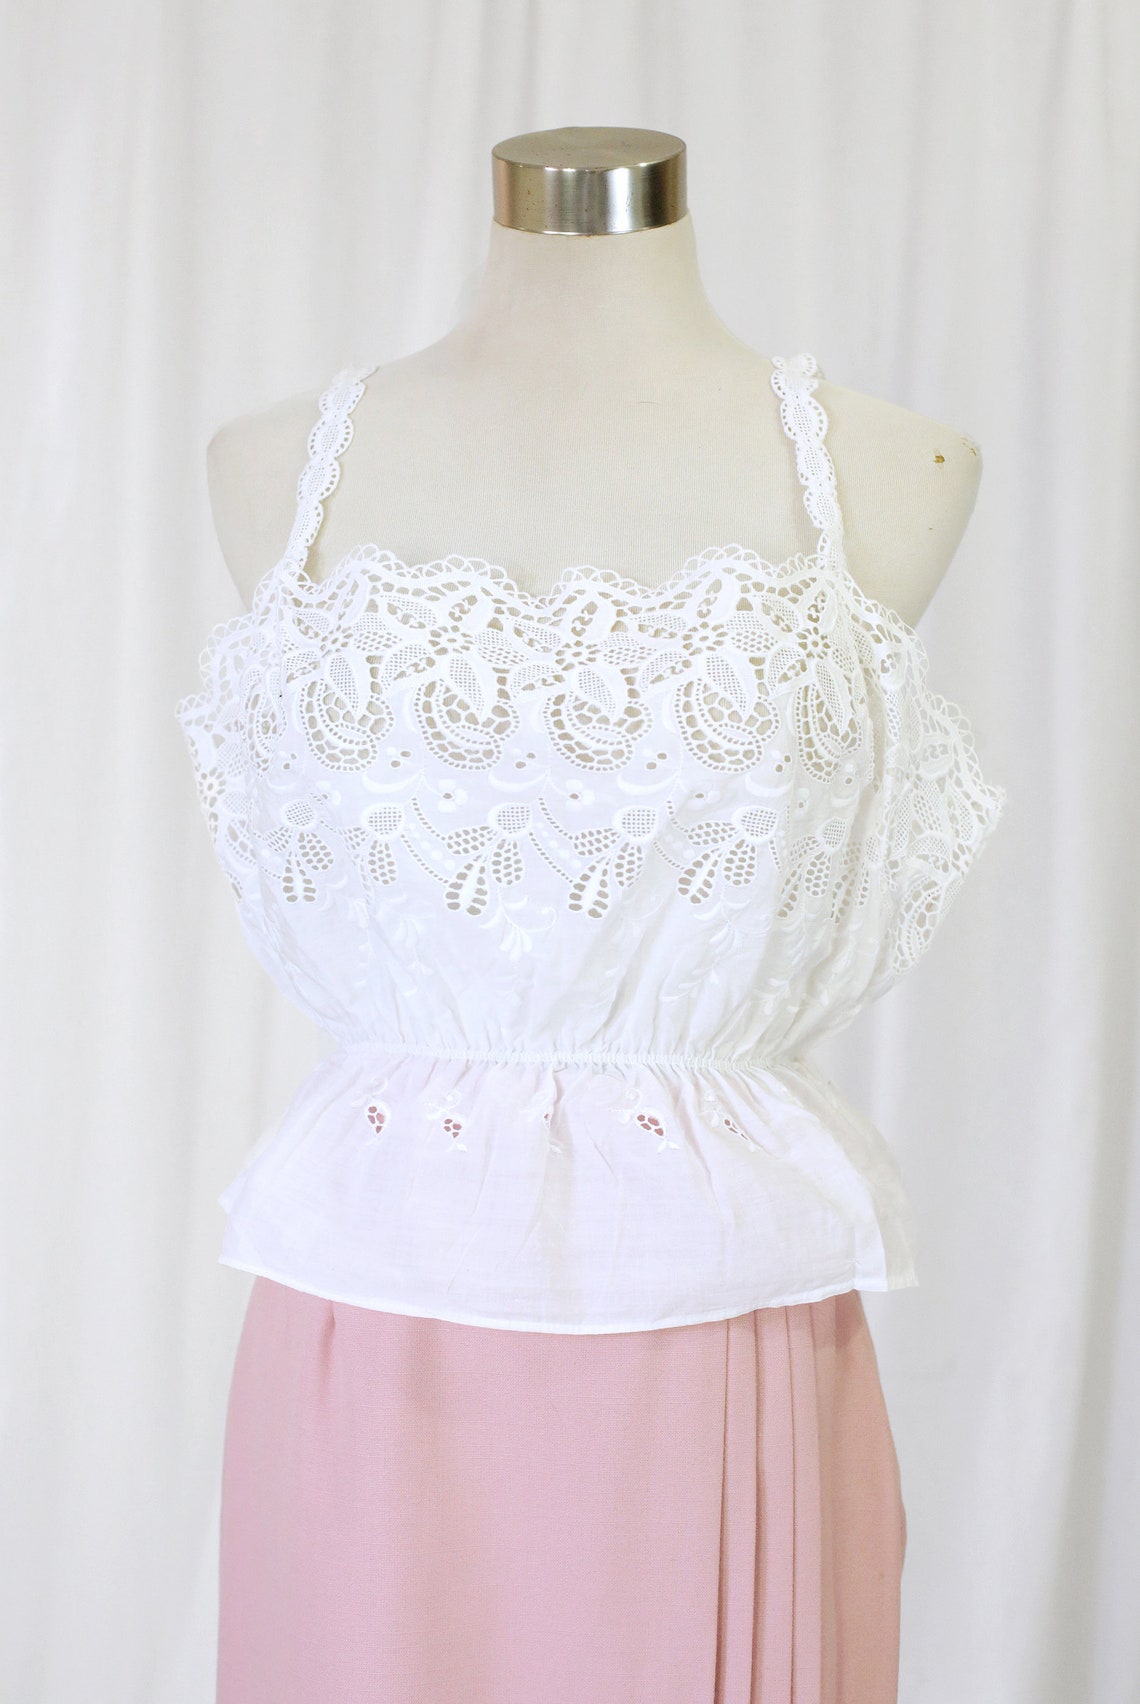 70s Lace White Frill Crop Top Bluse - Etsy